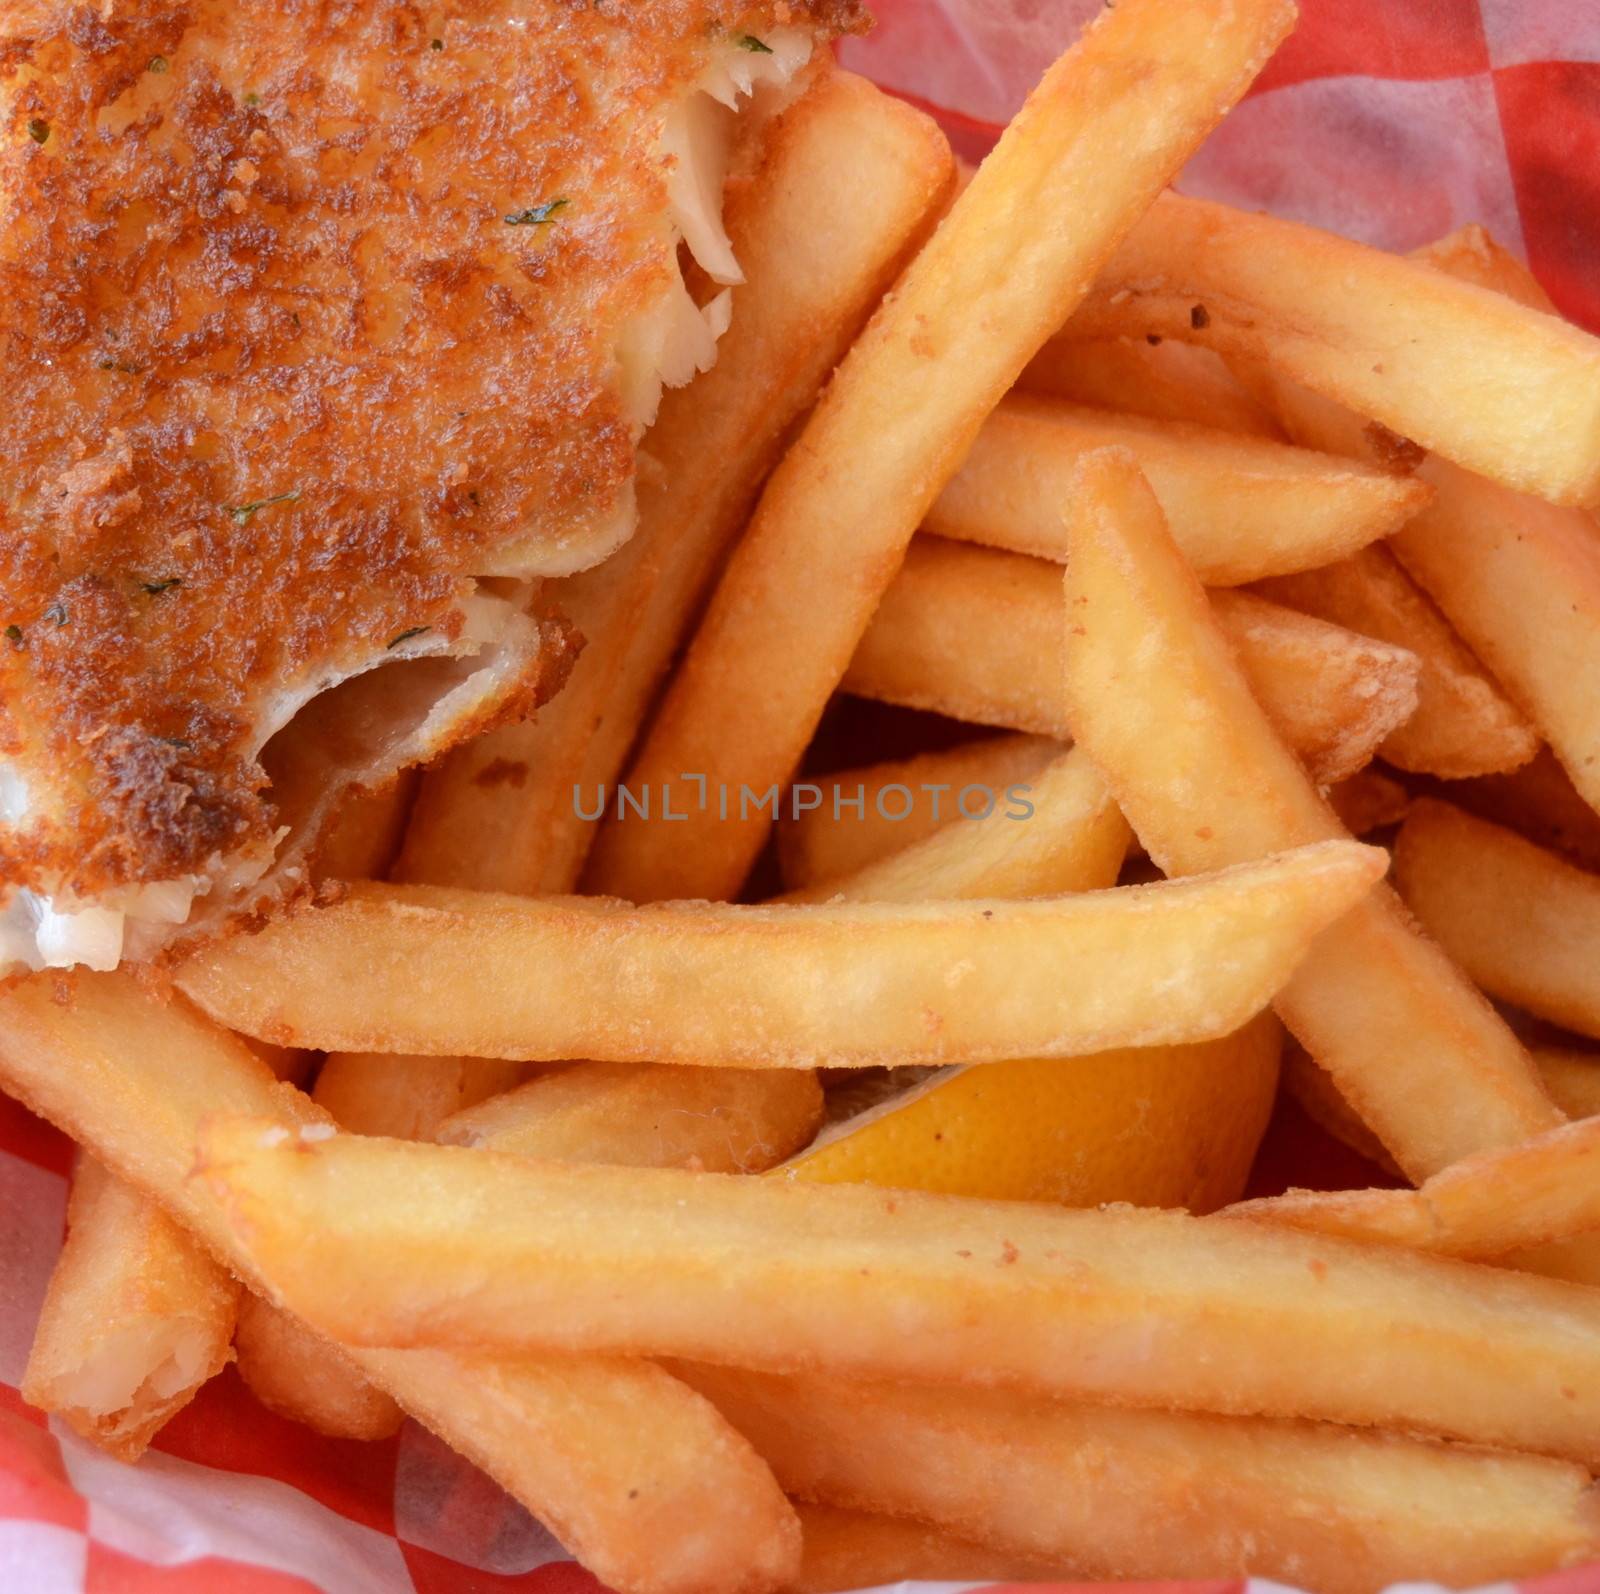 Food Image Of Takeaway Fish And Chips In Paper